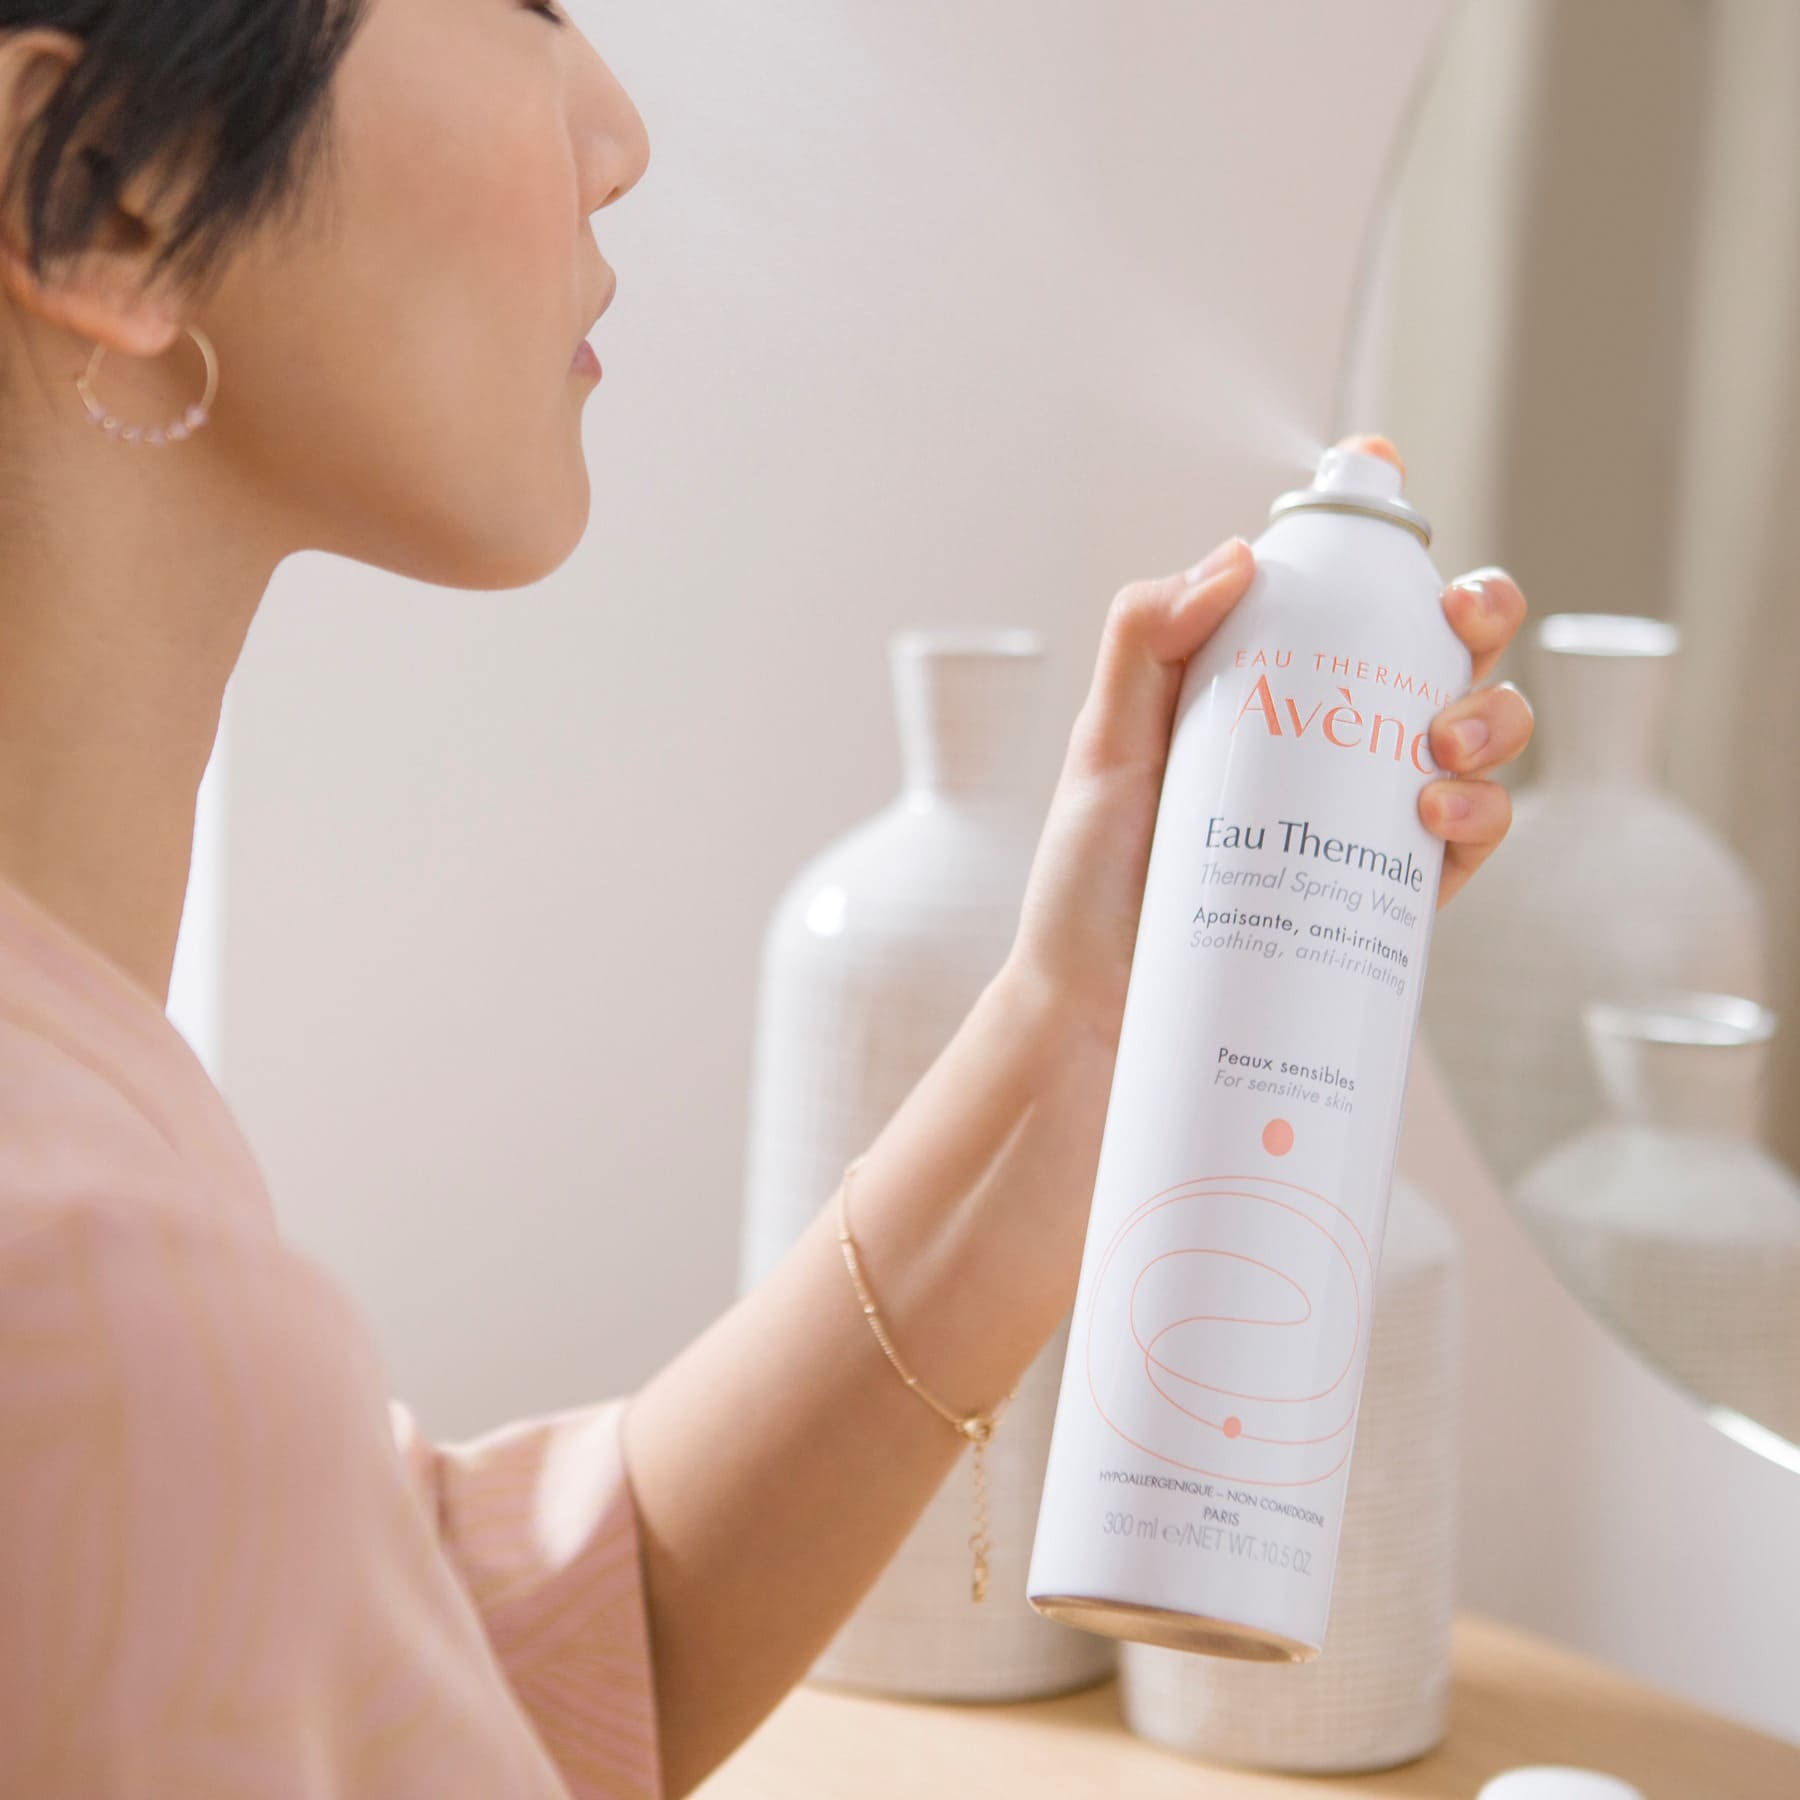 Avène Thermal Spring Water Spray provides pure, natural relief for sensitive skin.